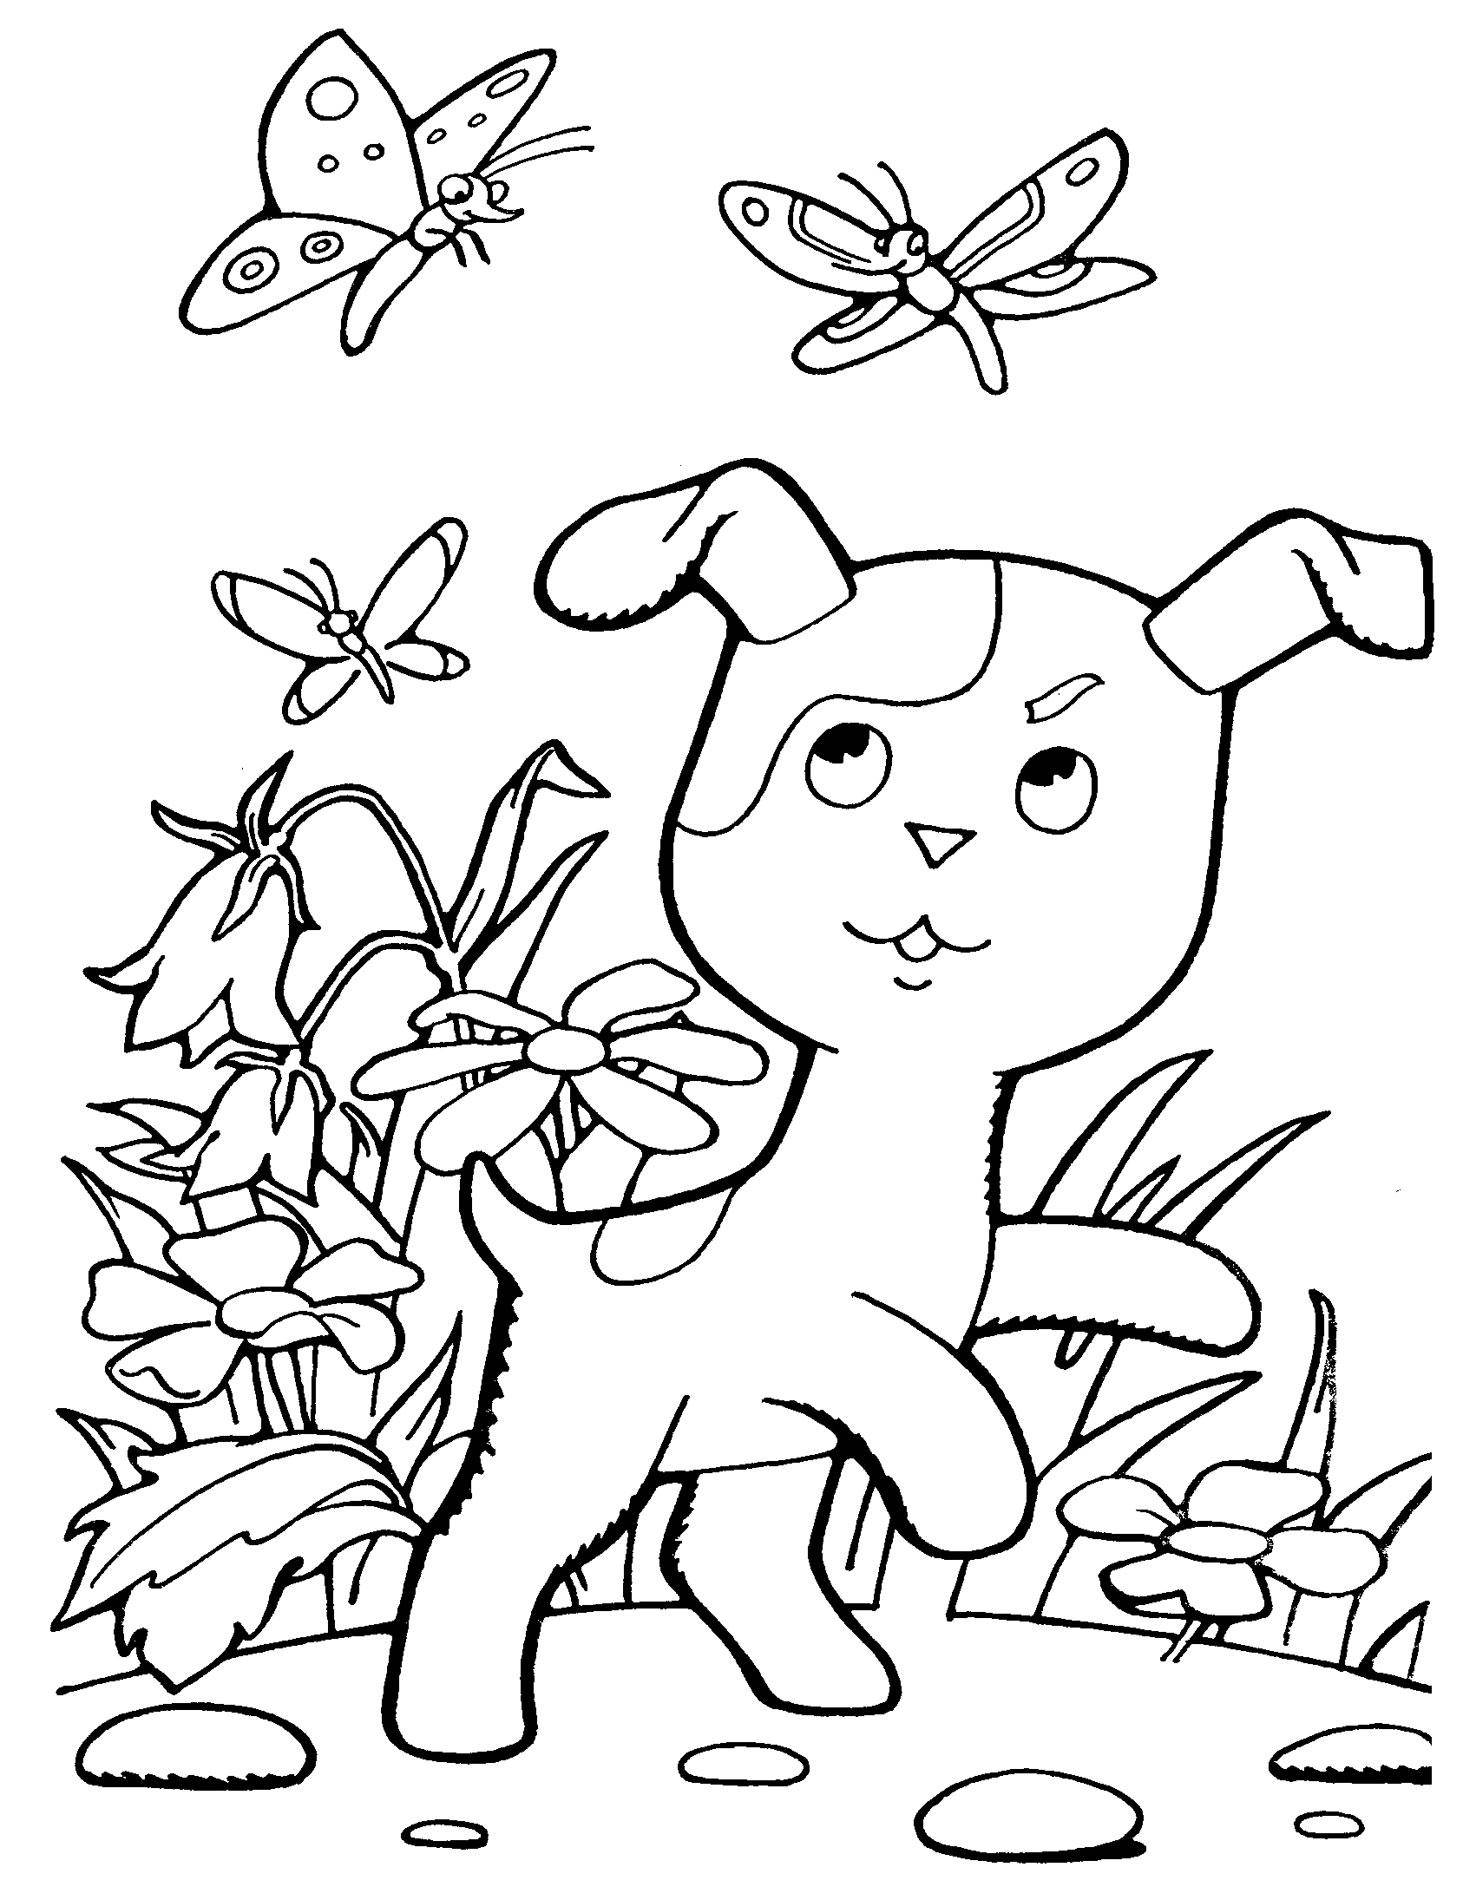 Coloring Figure dog hunting. Category Pets allowed. Tags:  the dog.